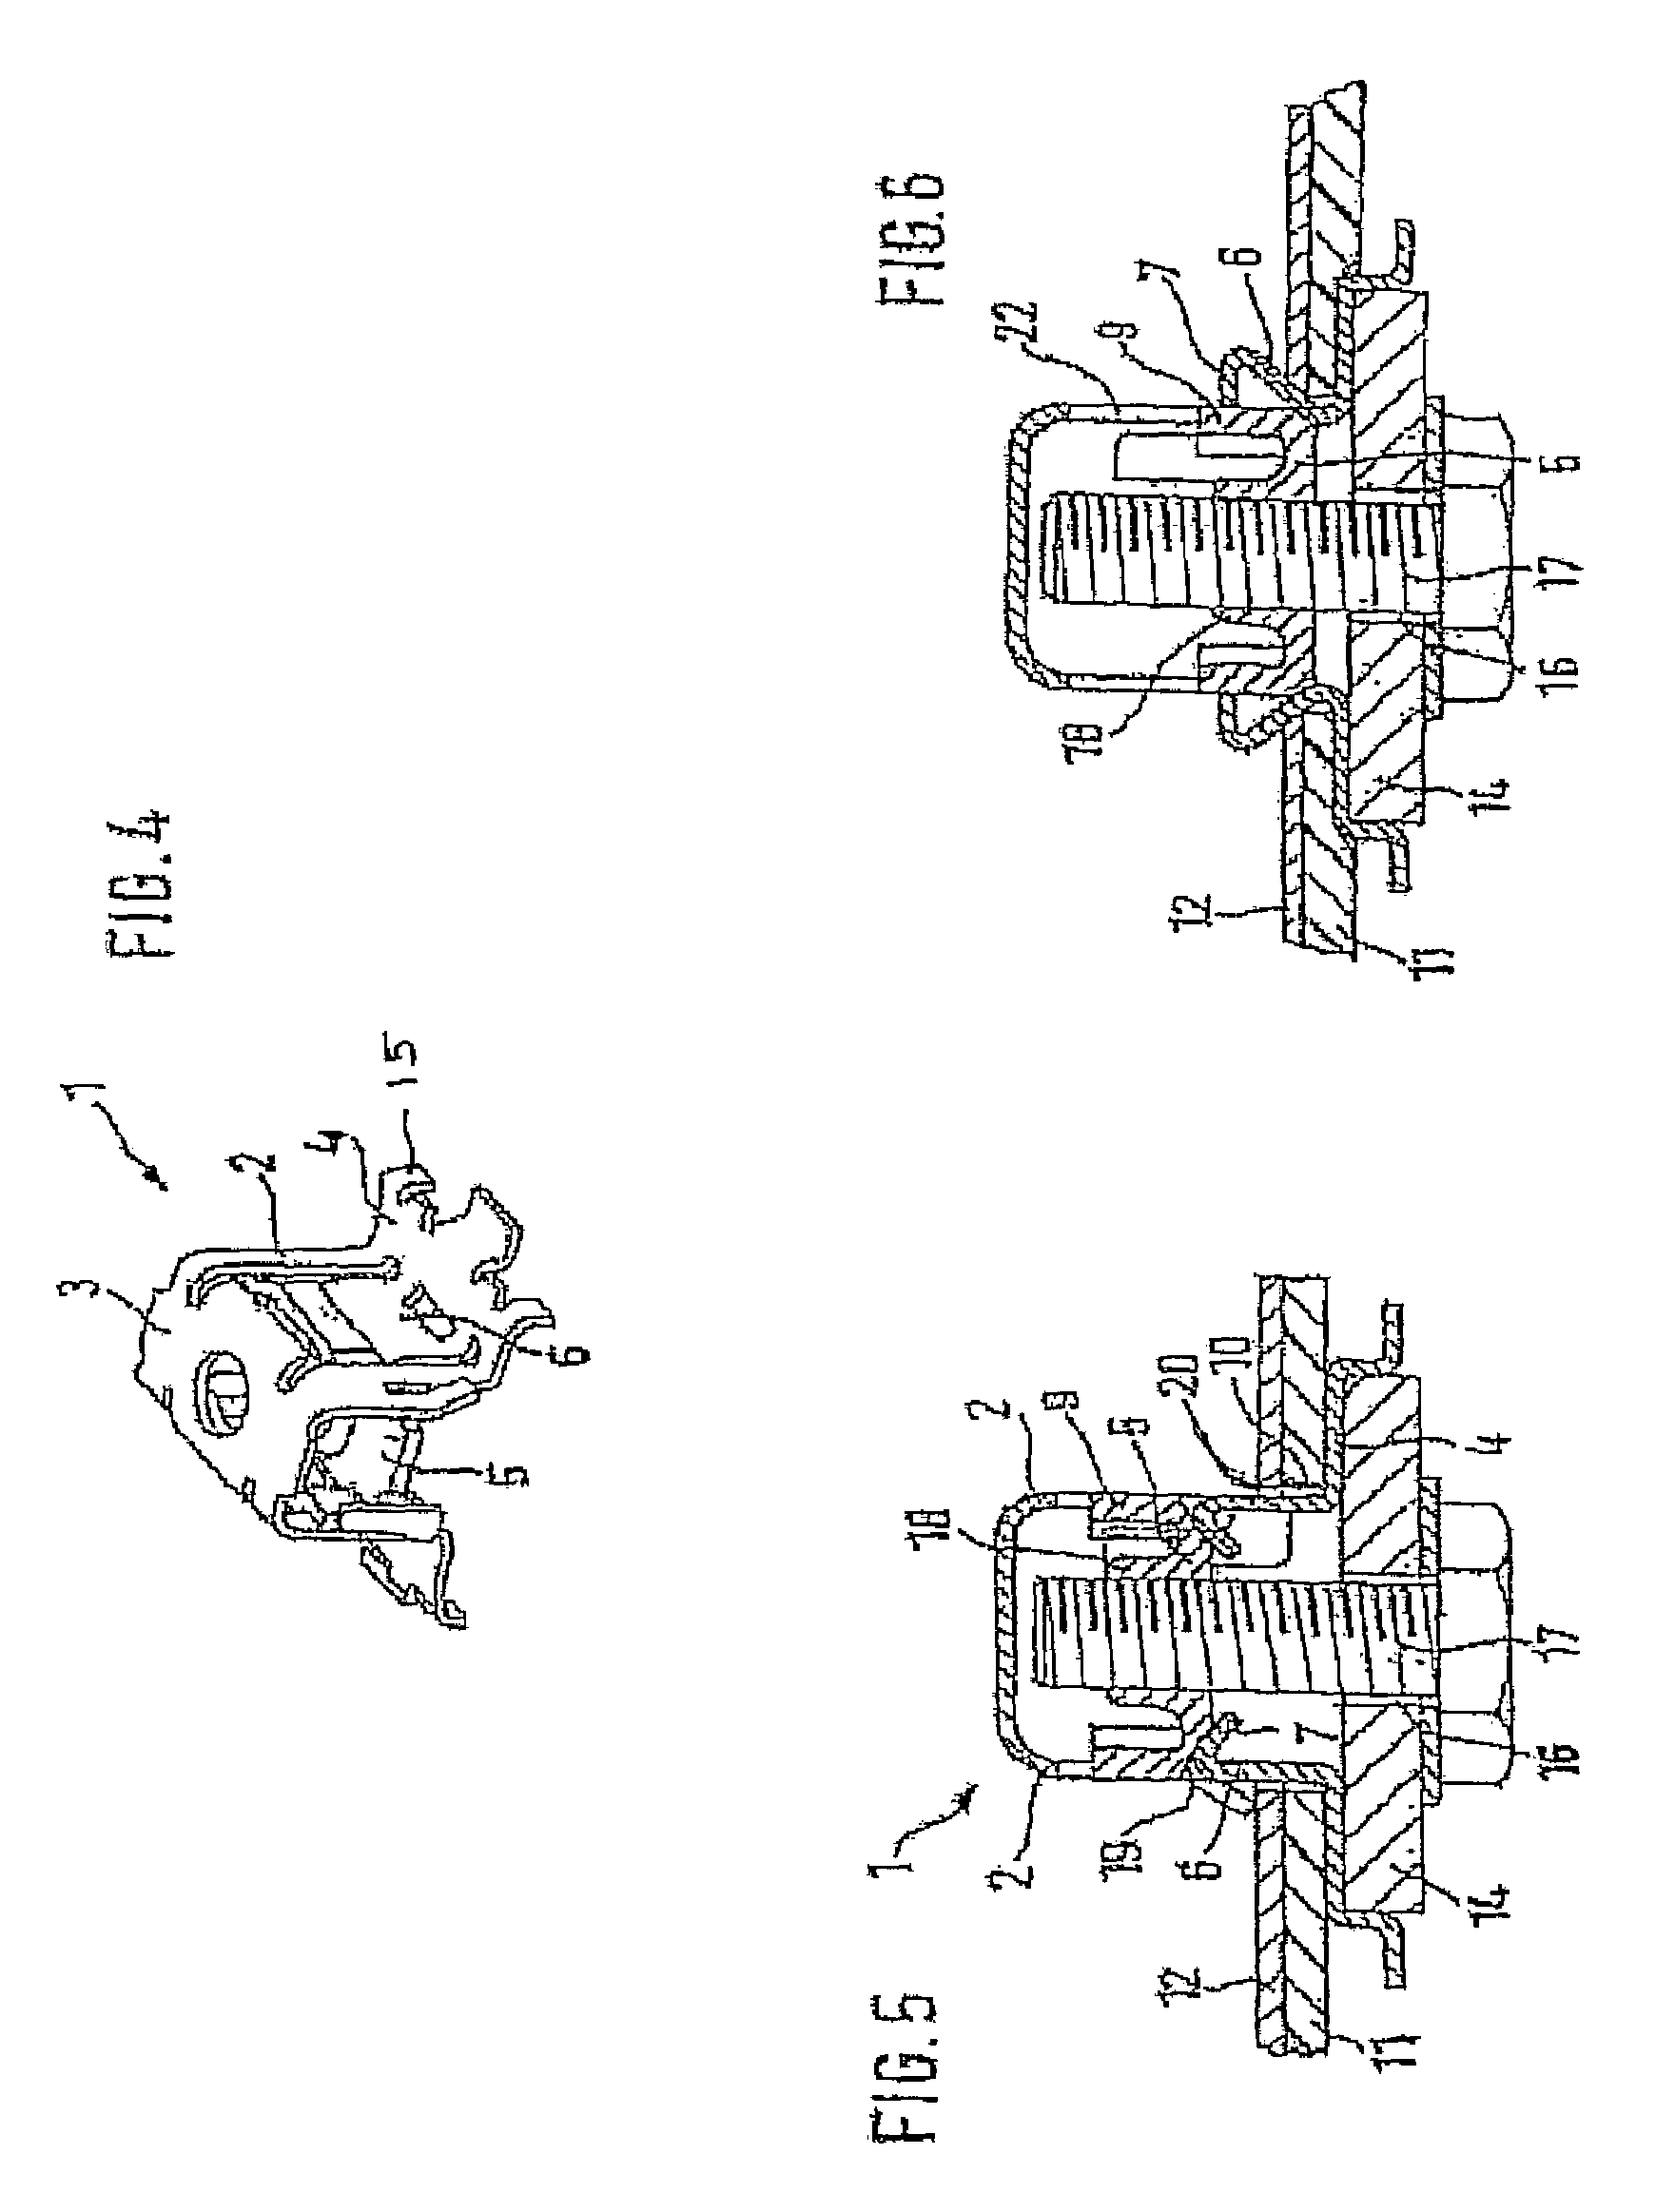 Fixing clamp for anchoring a component in the hole of a support plate